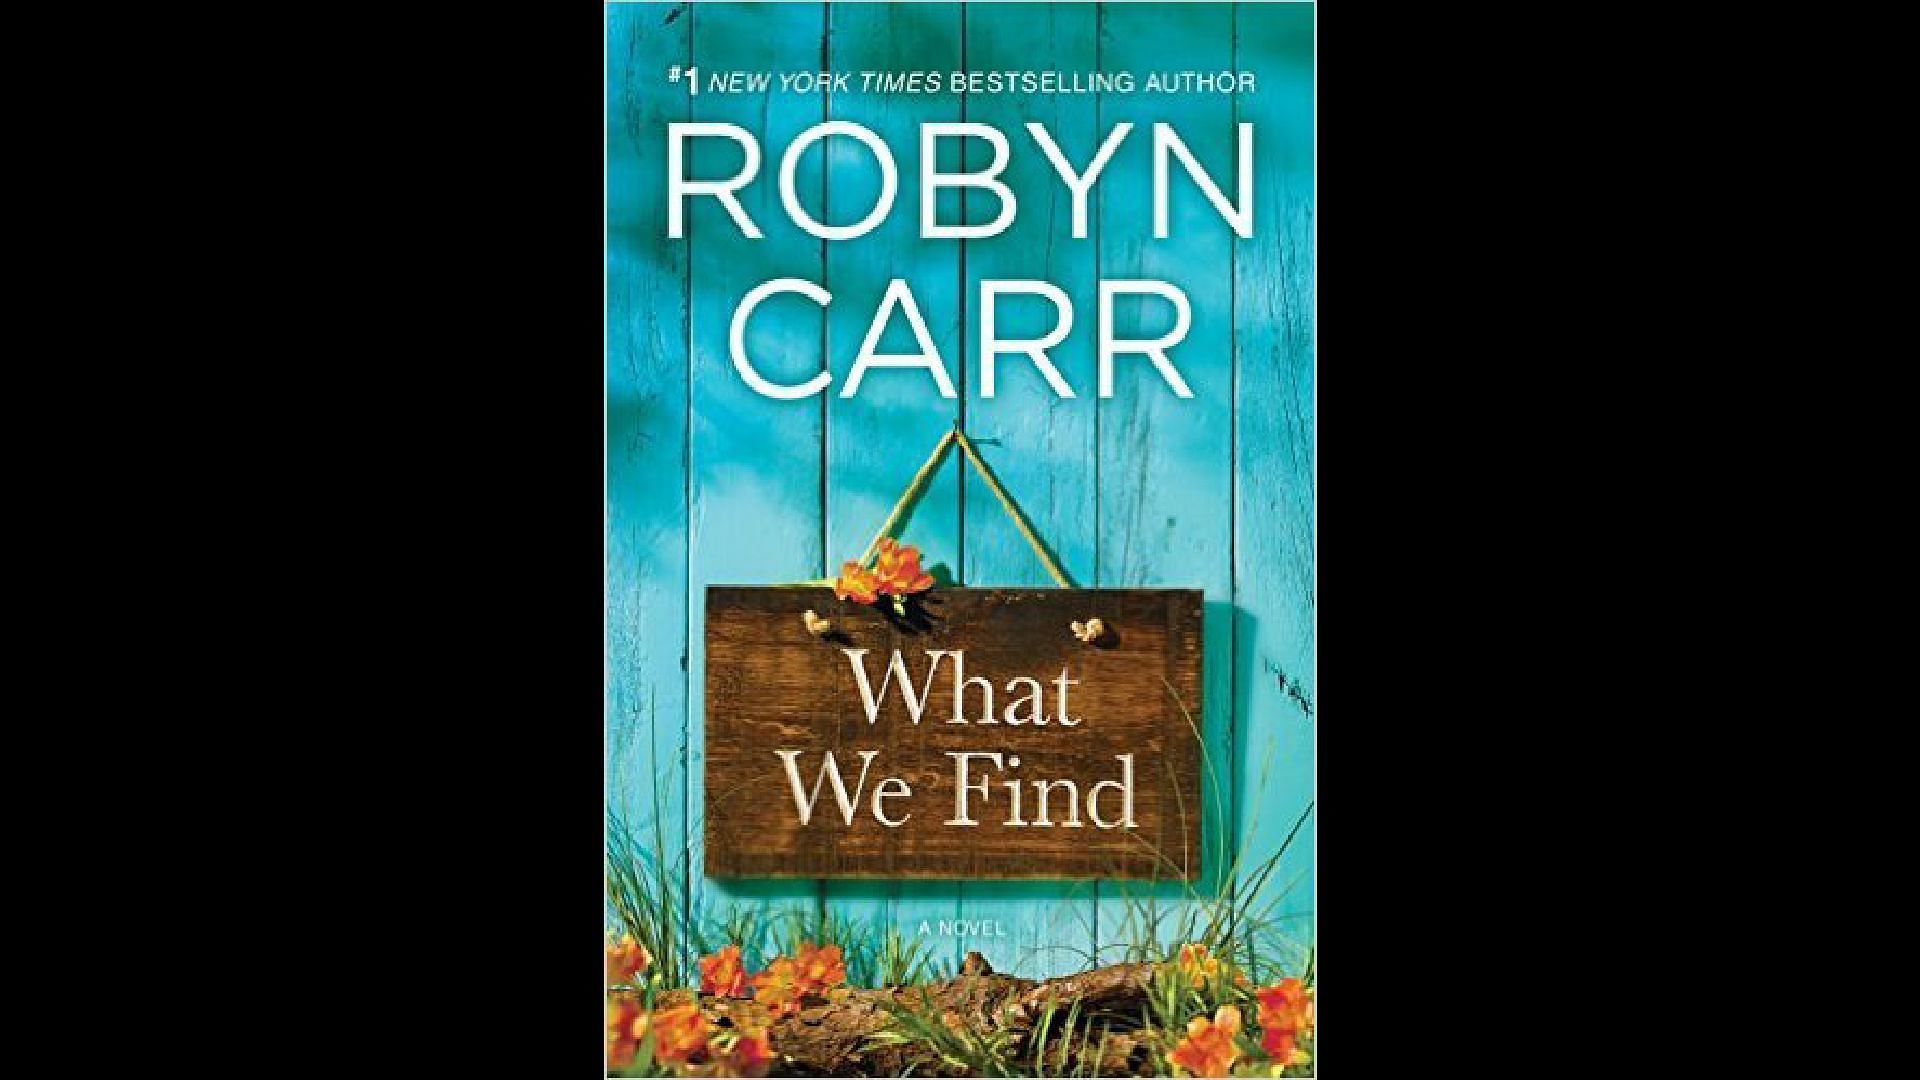 Robyn Carr&#039;s What We Find (Image via Goodreads)